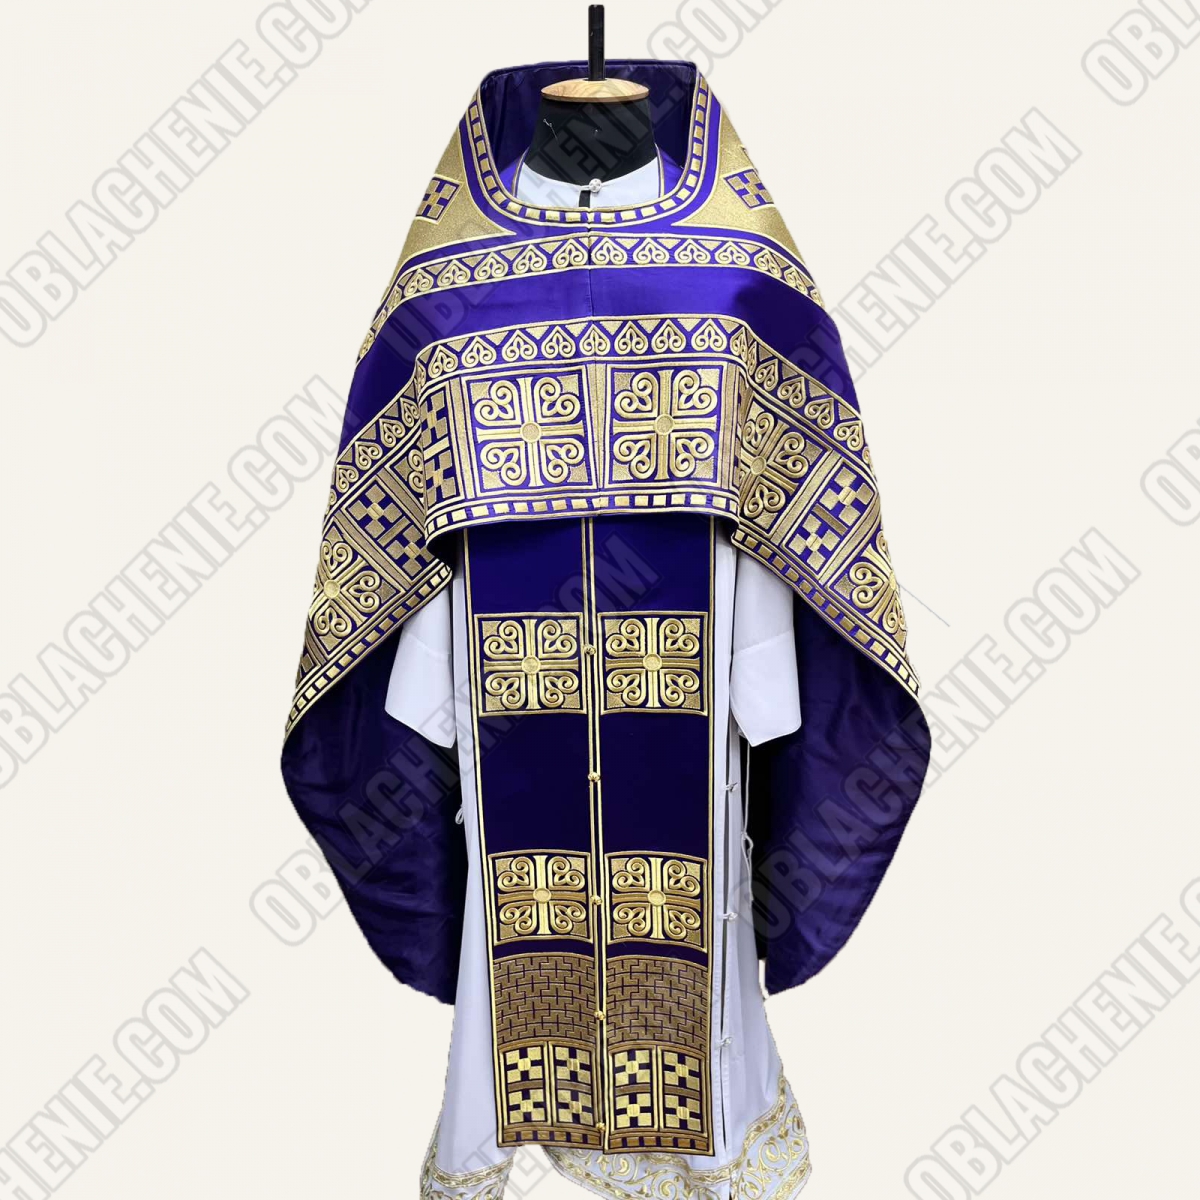 EMBROIDERED PRIEST'S VESTMENTS 12060